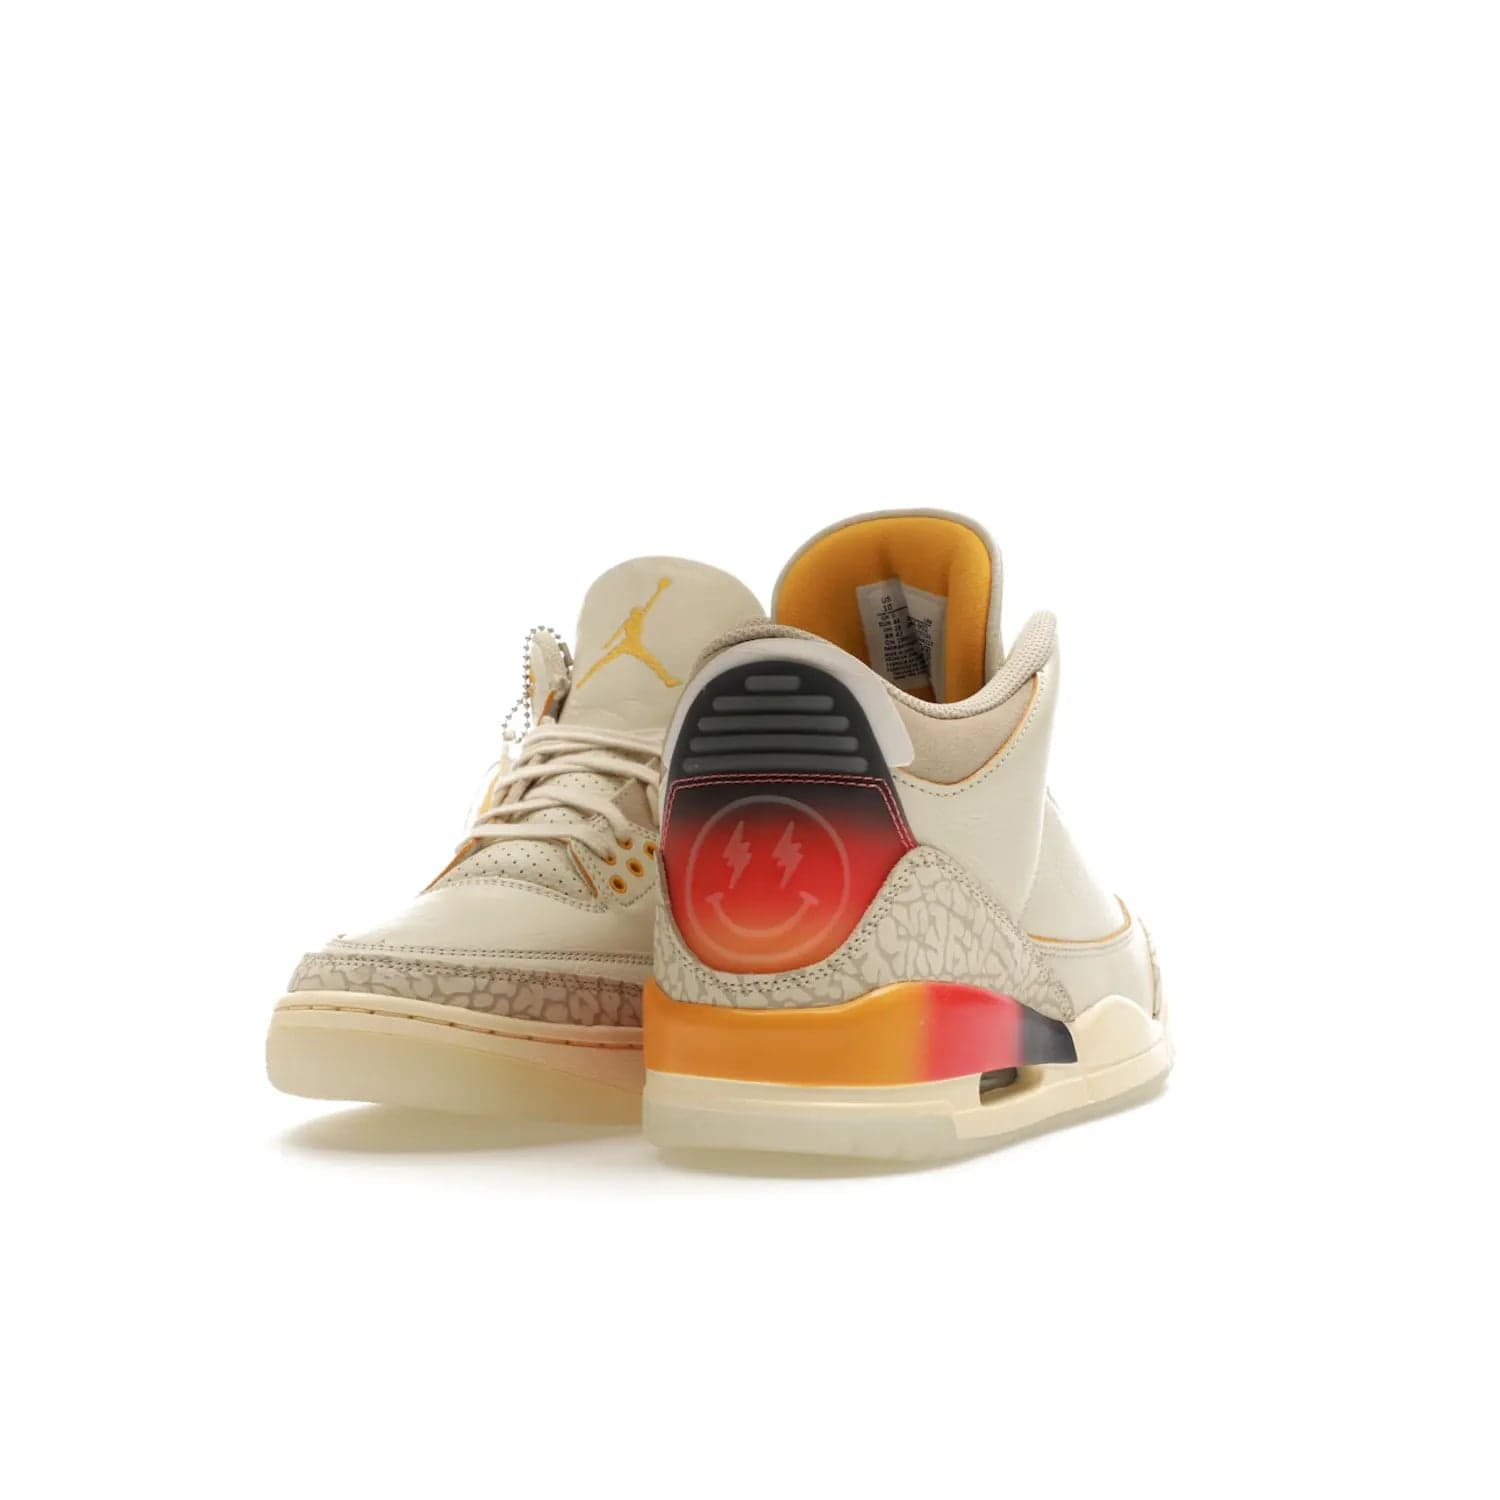 Jordan 3 Retro SP J Balvin Medellín Sunset - Image 30 - Only at www.BallersClubKickz.com - J Balvin x Jordan 3 Retro SP: Celebrate the joy of life with a colorful, homage to the electrifying reggaeton culture and iconic Jordan 3. Limited edition, Sept. 23. $250.